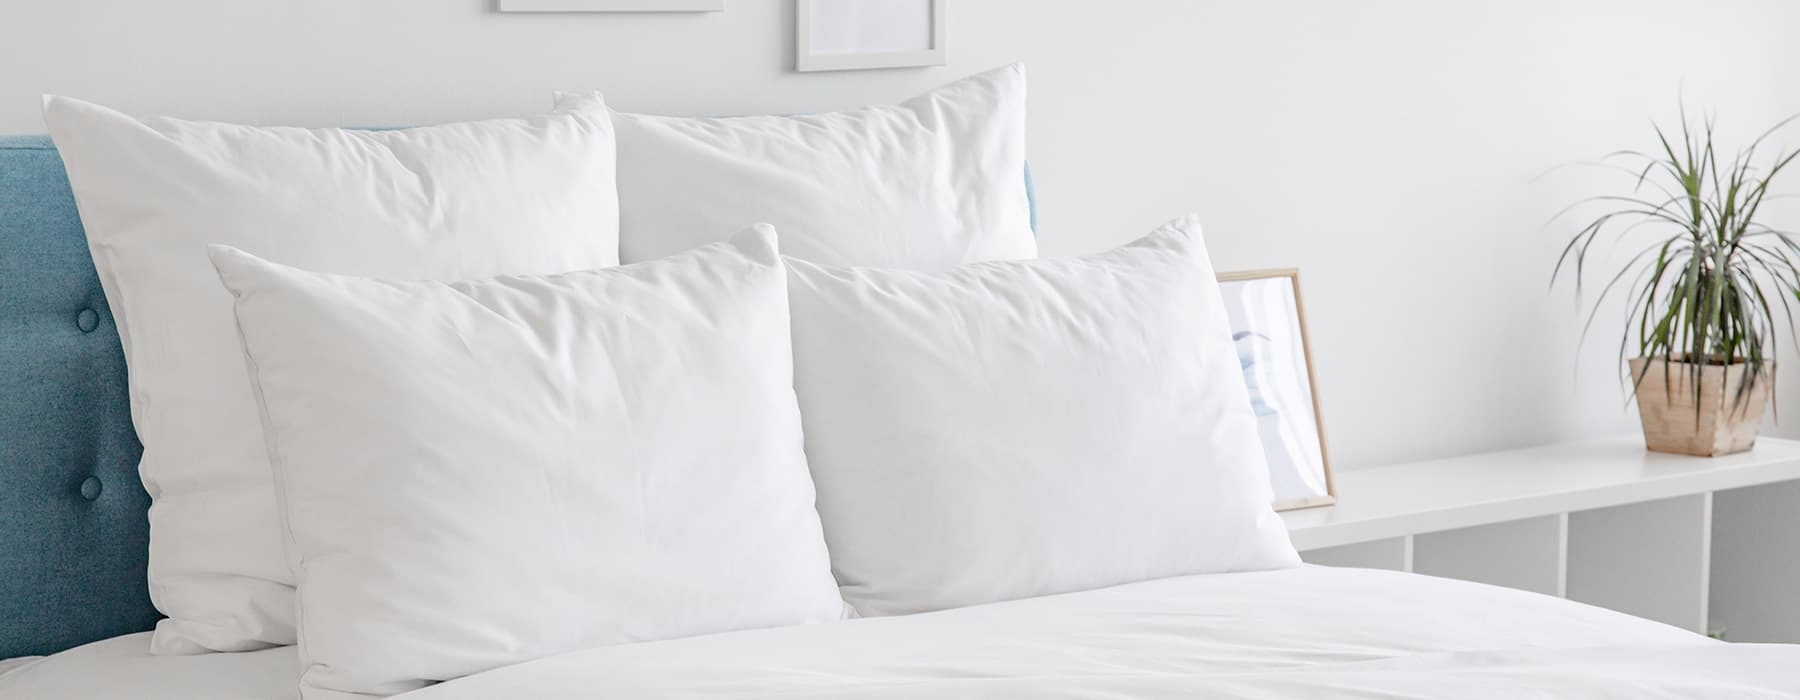 white and bright pillows and bed spread